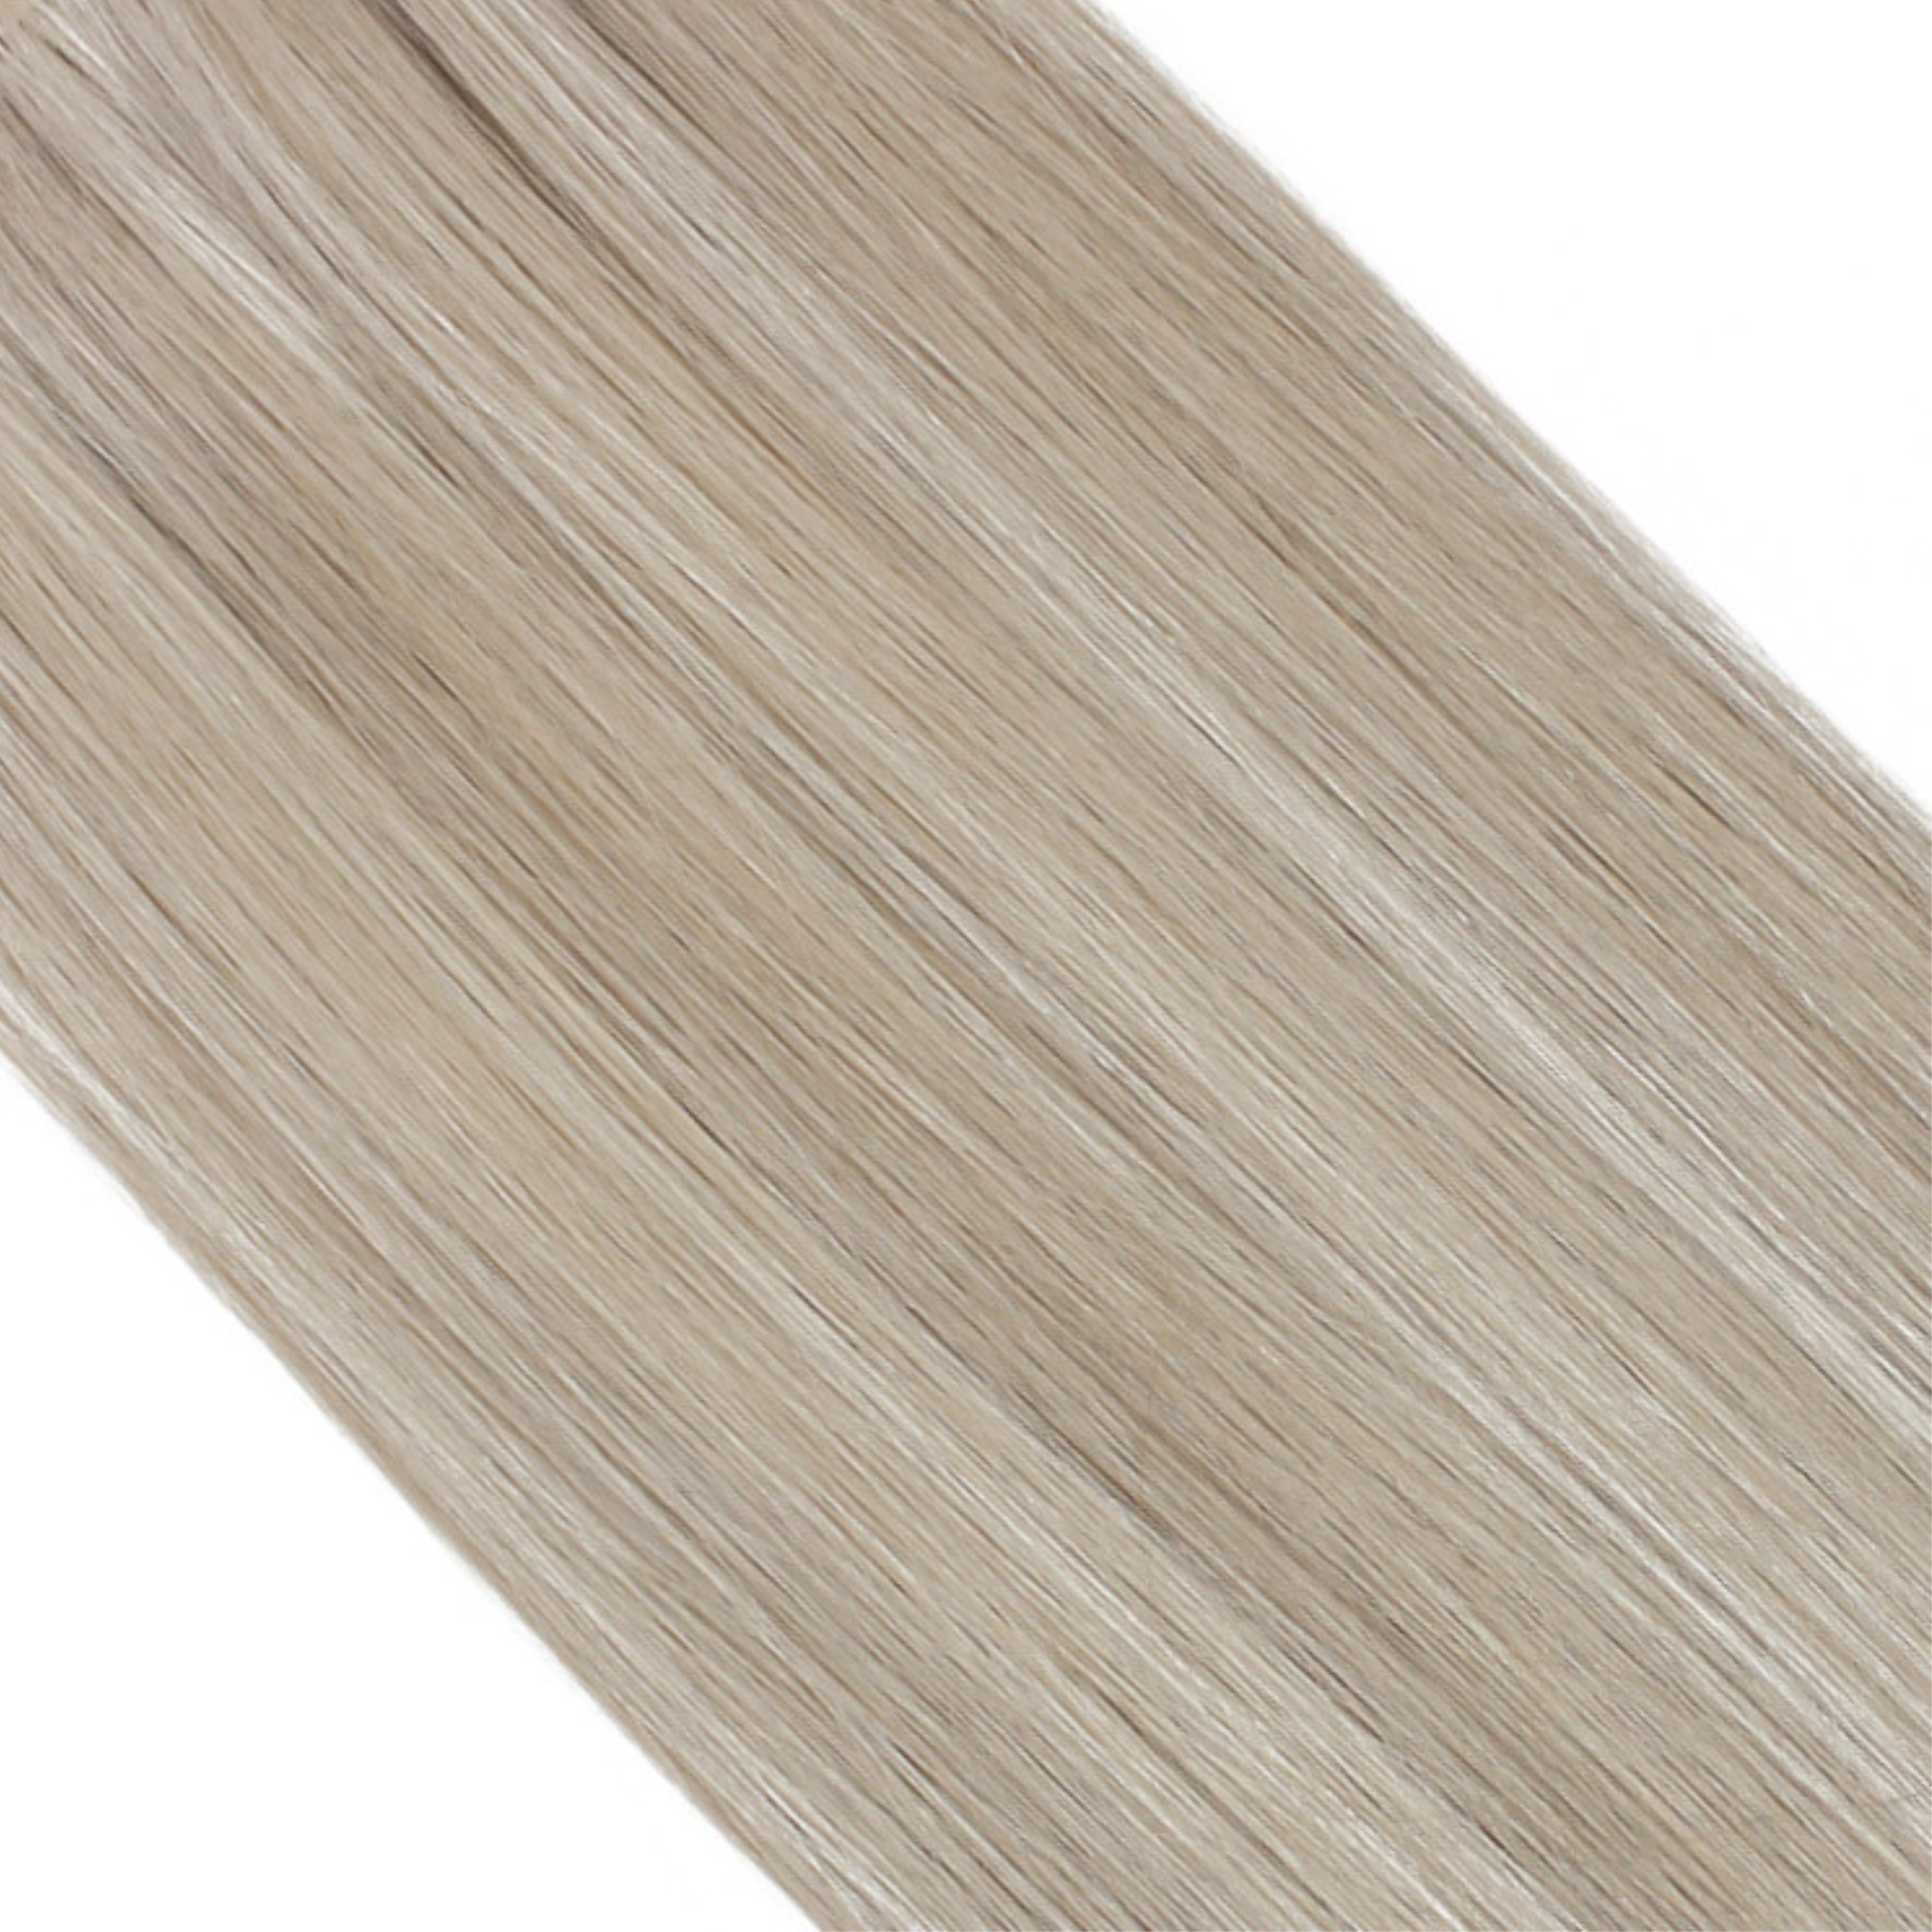 "hair rehab london 18" tape hair extensions shade swatch titled steel blonde"